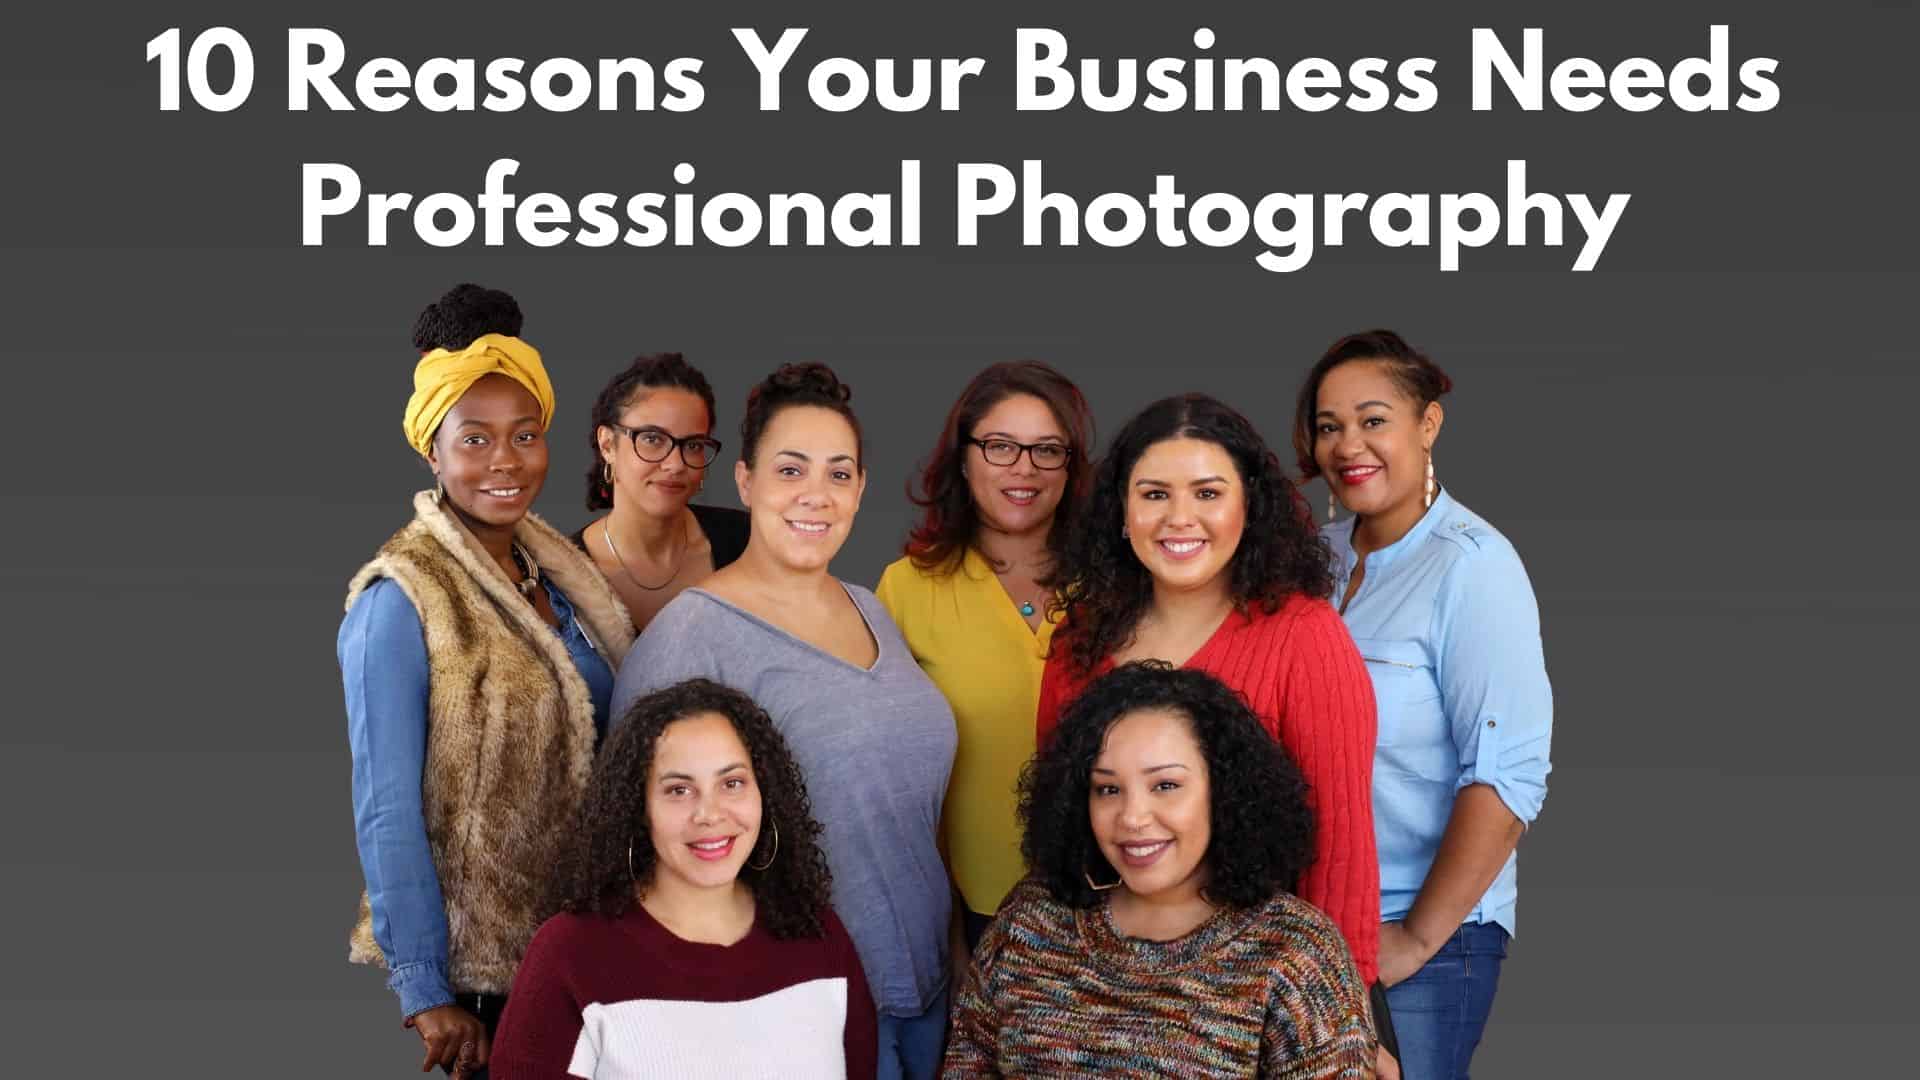 10 Reasons Your Business Needs Professional Photography